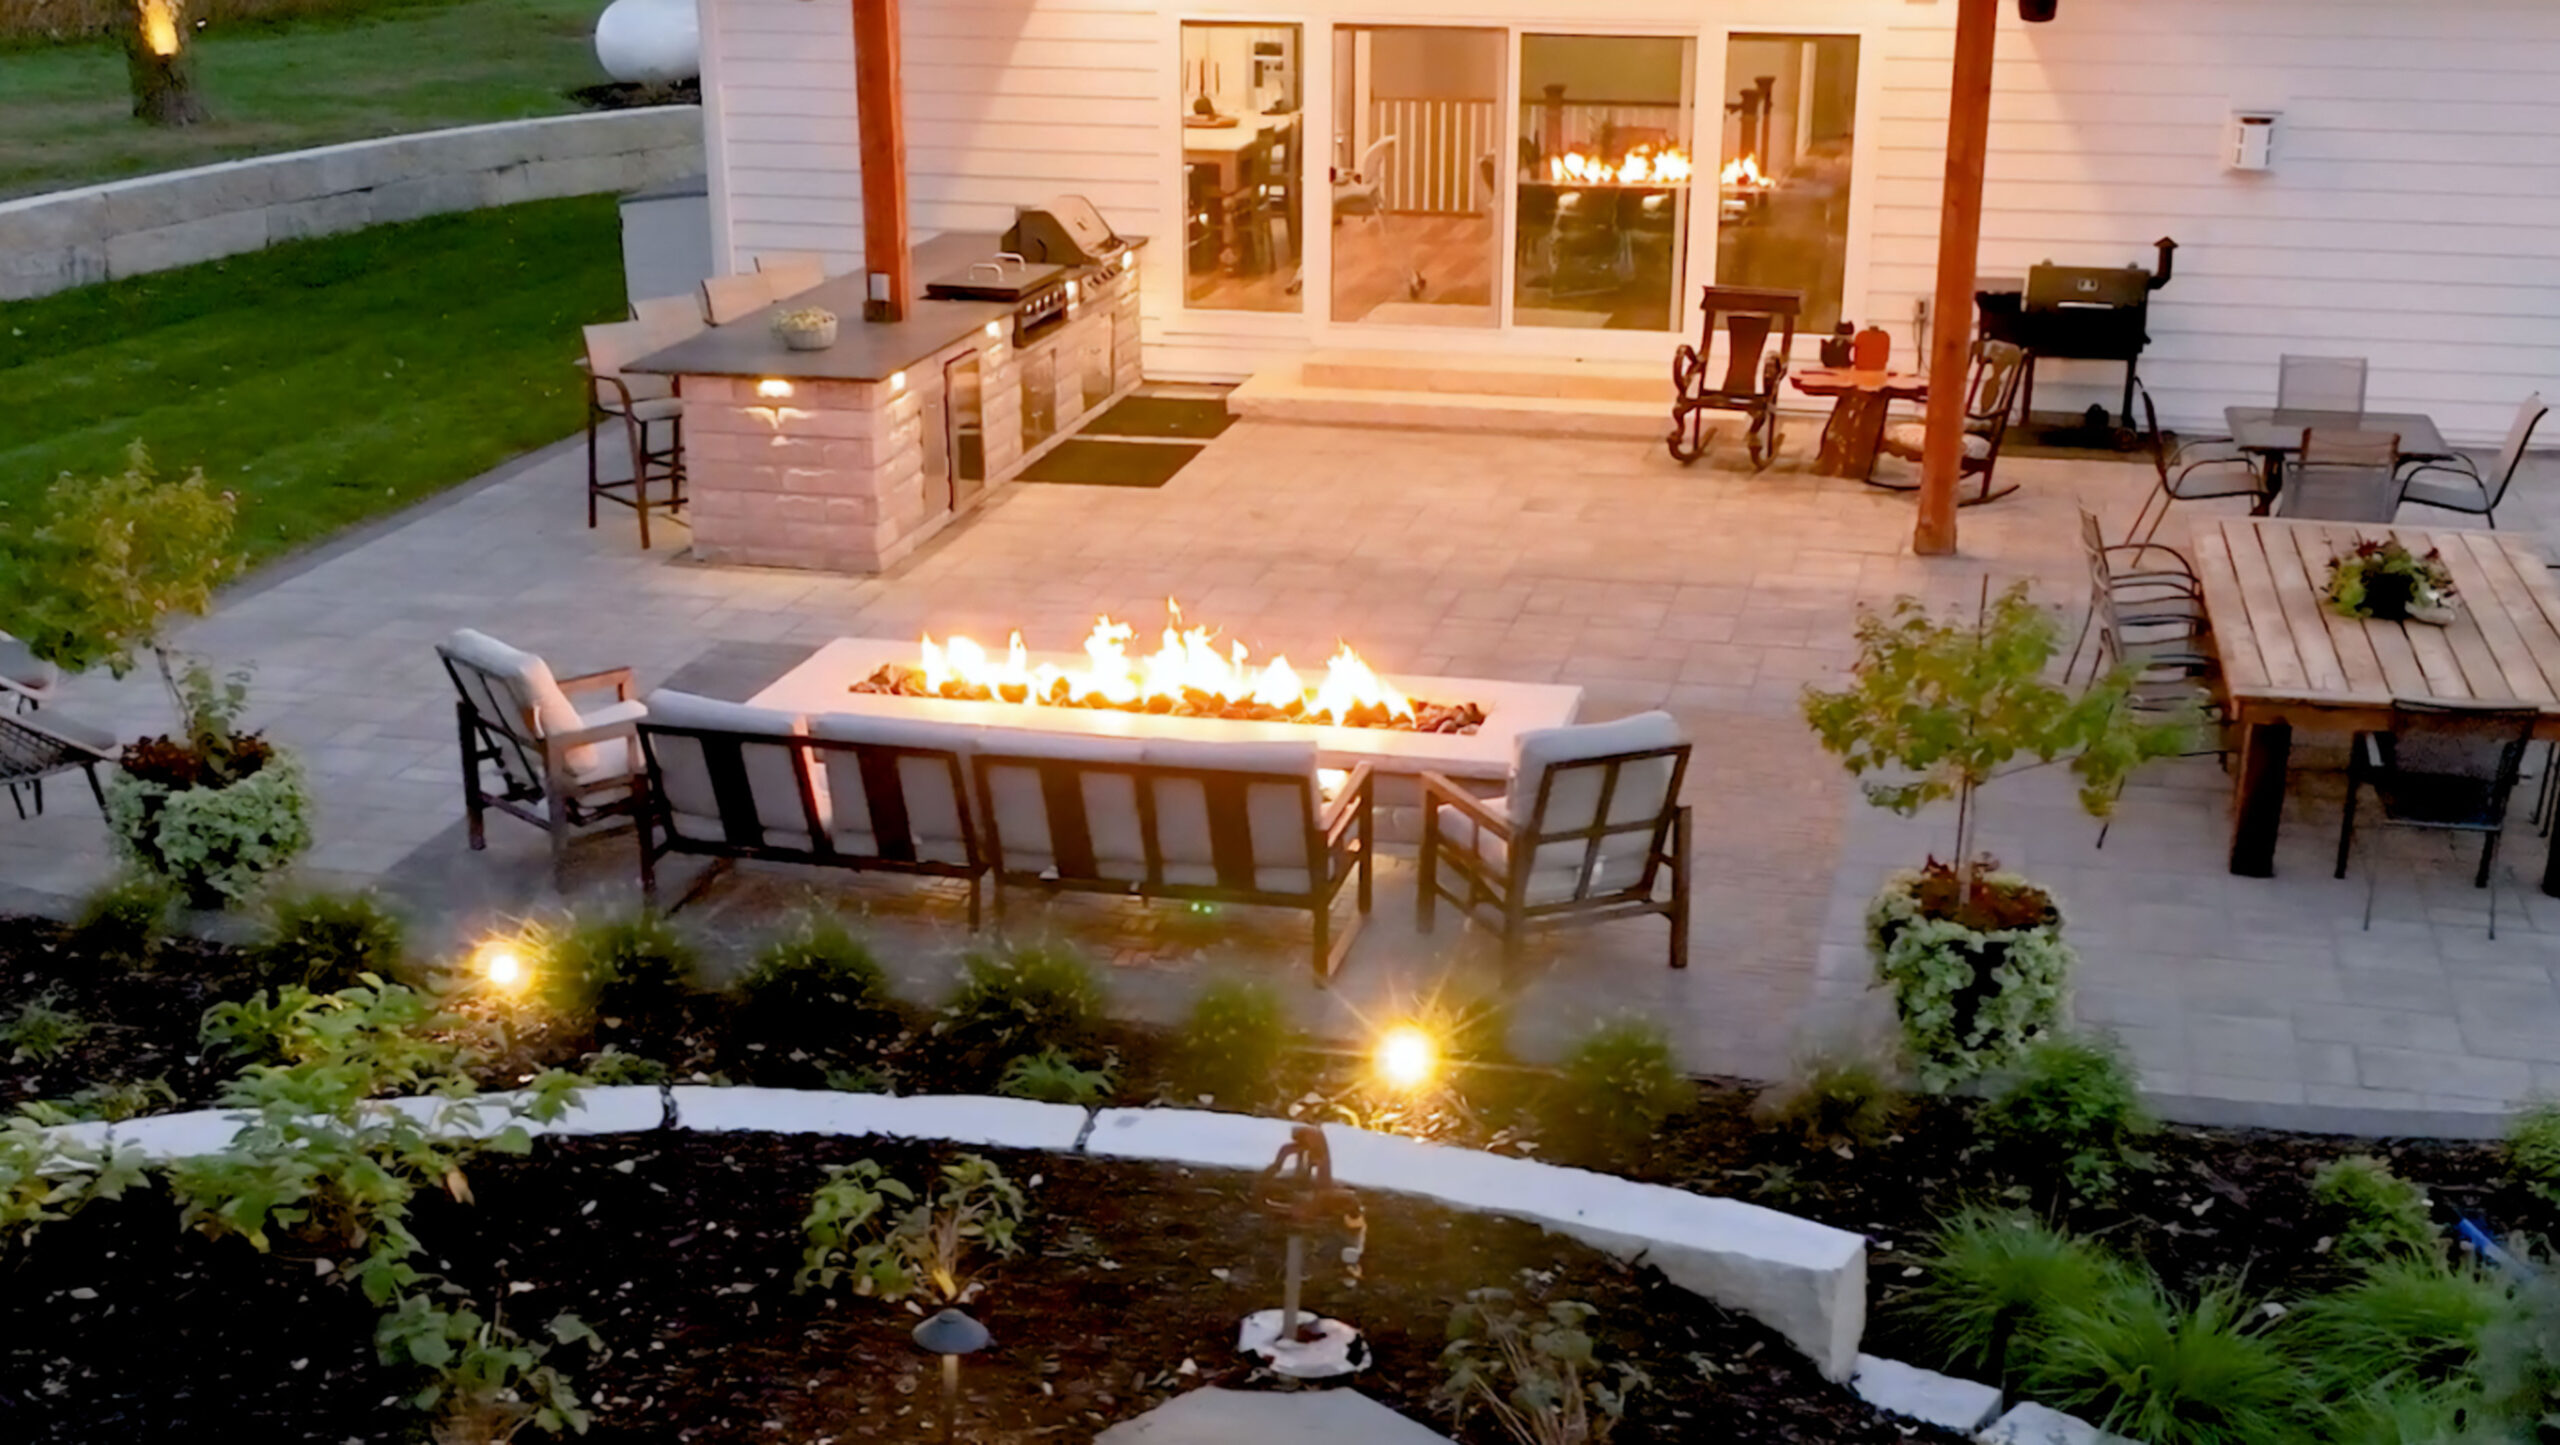 Evening view of a backyard patio with a fire feature, outdoor kitchen, and seating area